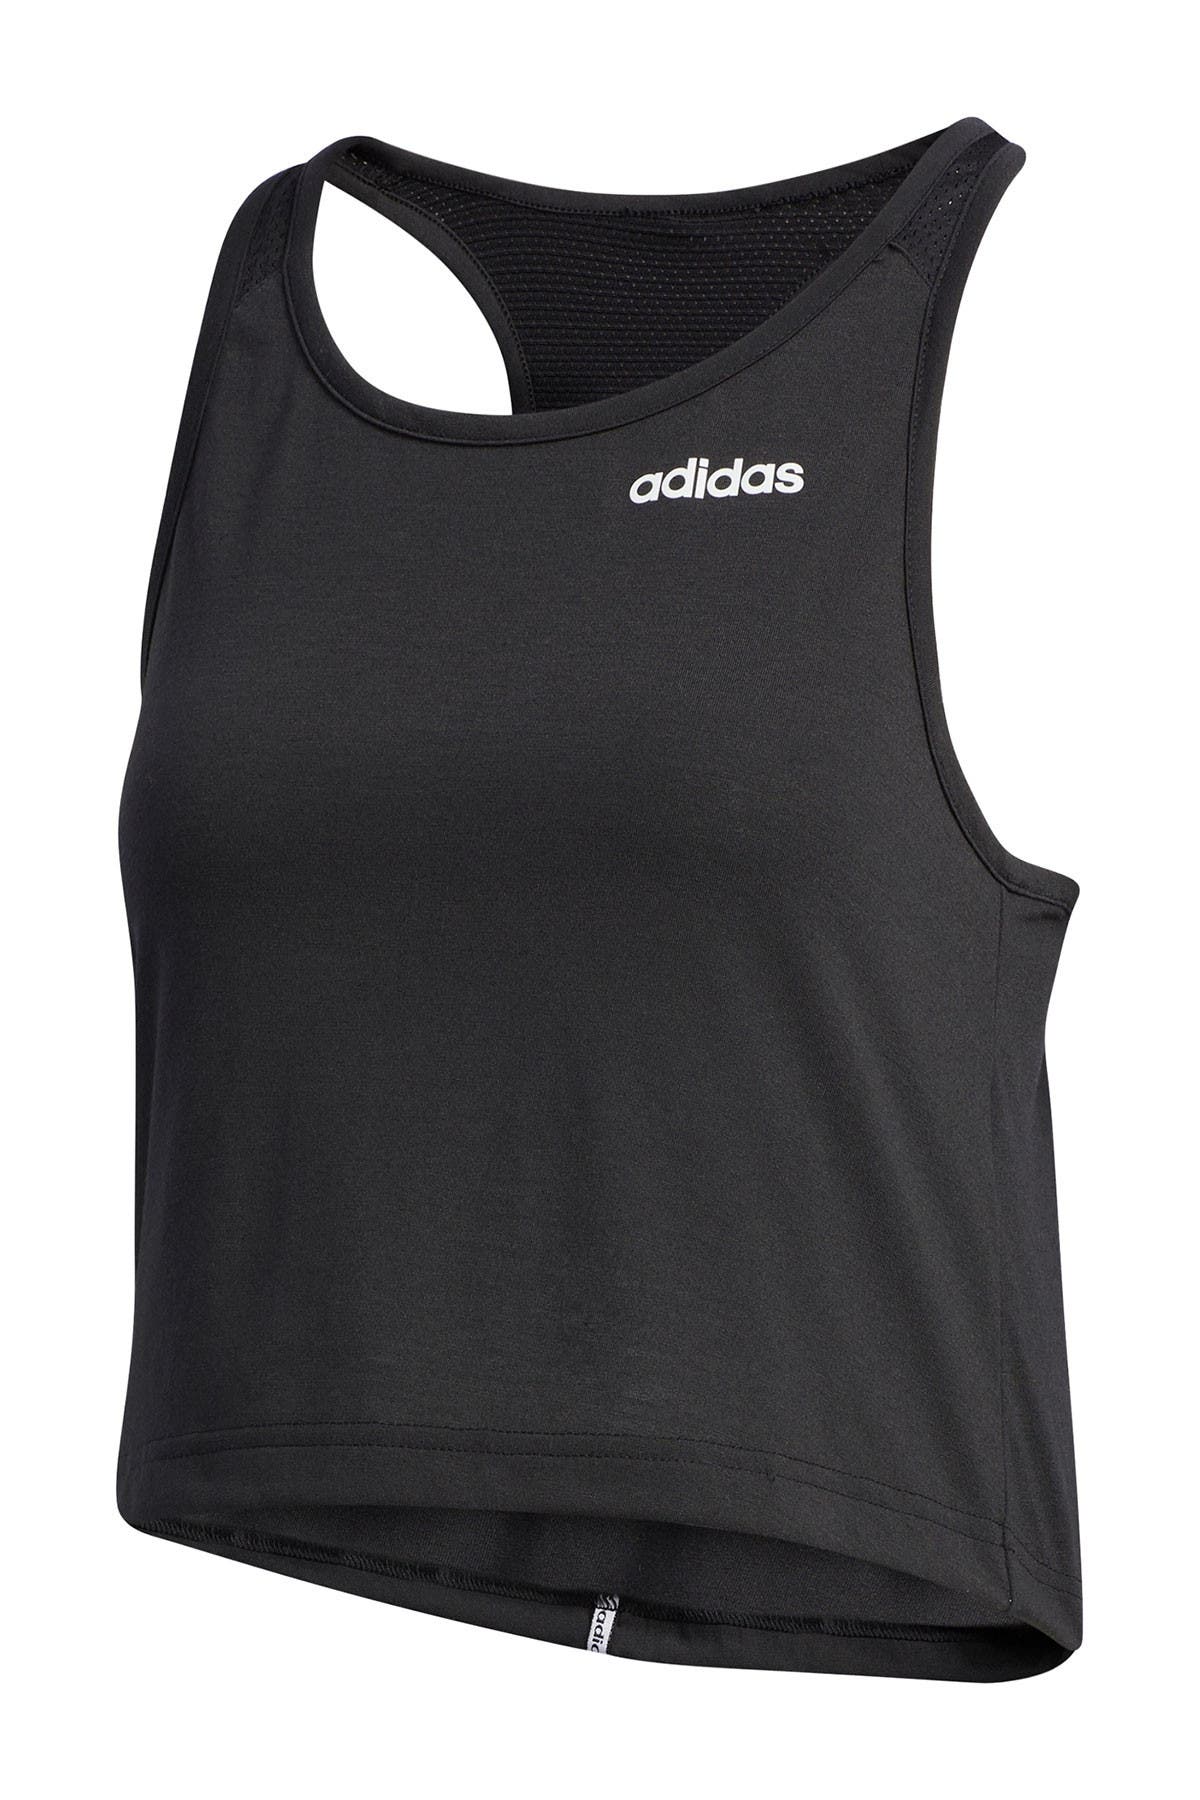 adidas cropped vest